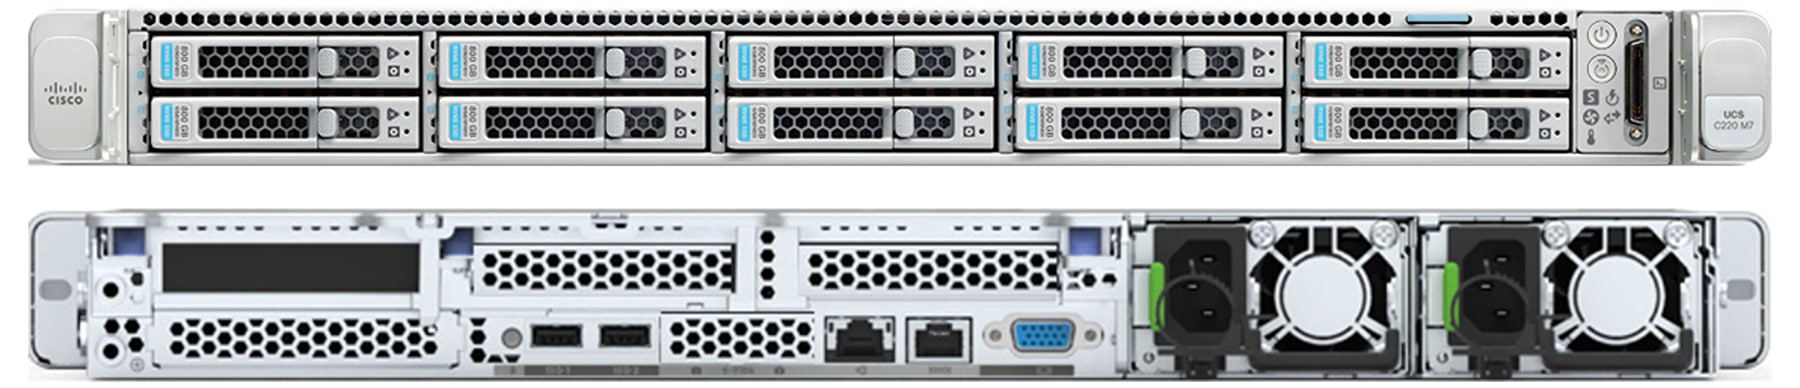 Front and rear view of Cisco UCS C220 M7 Rack Server